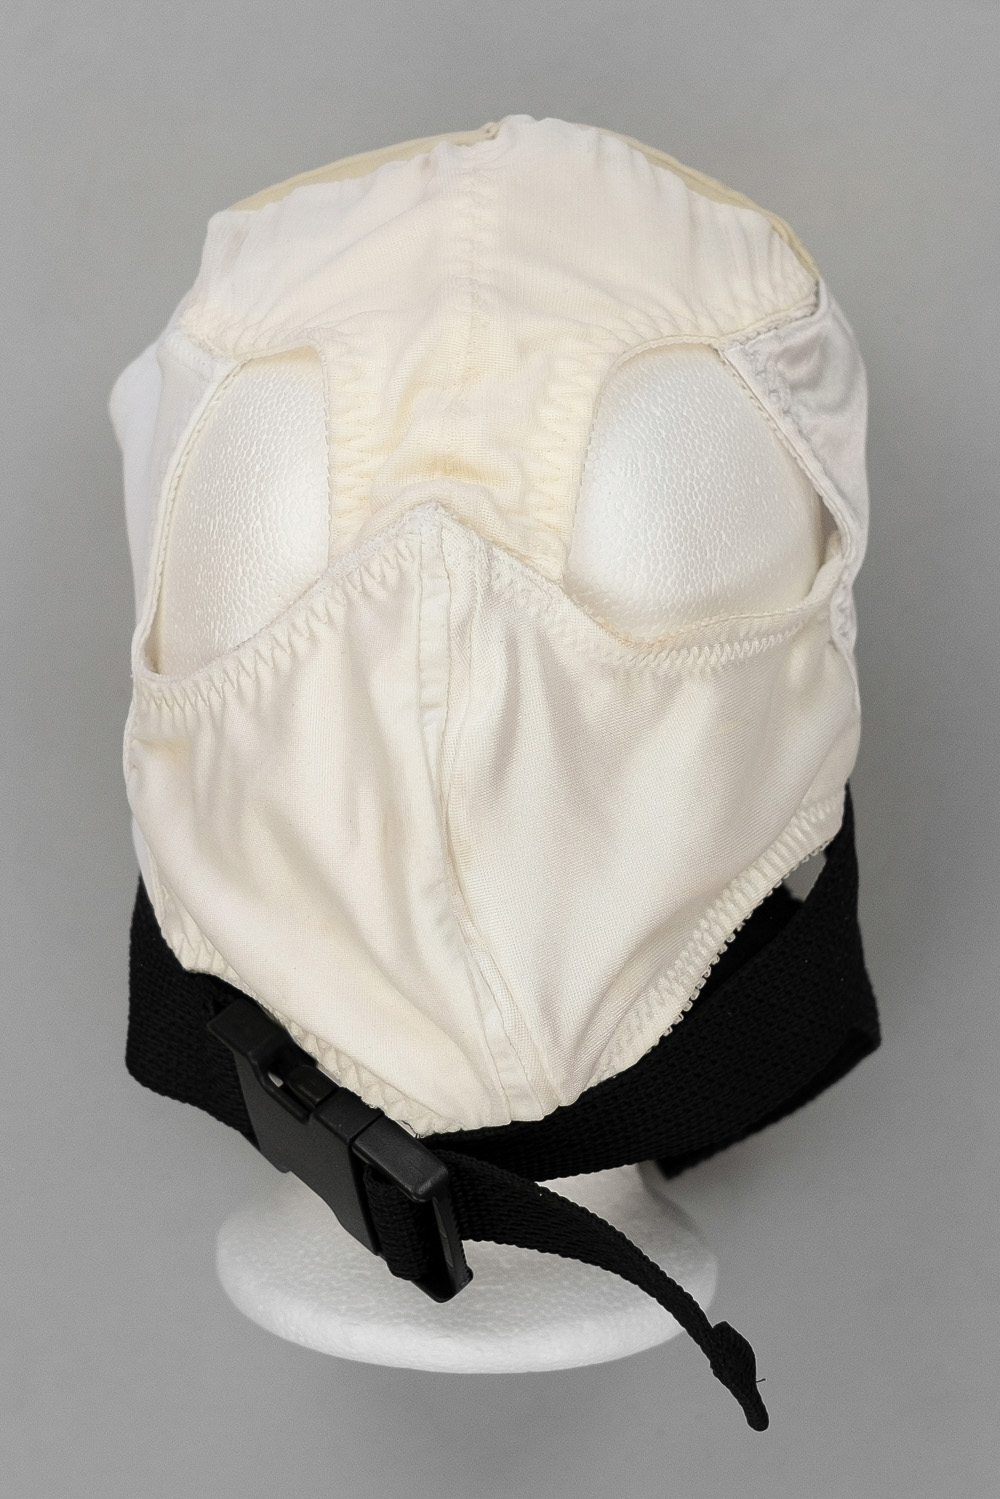 Gusset Mask in Black and White 5